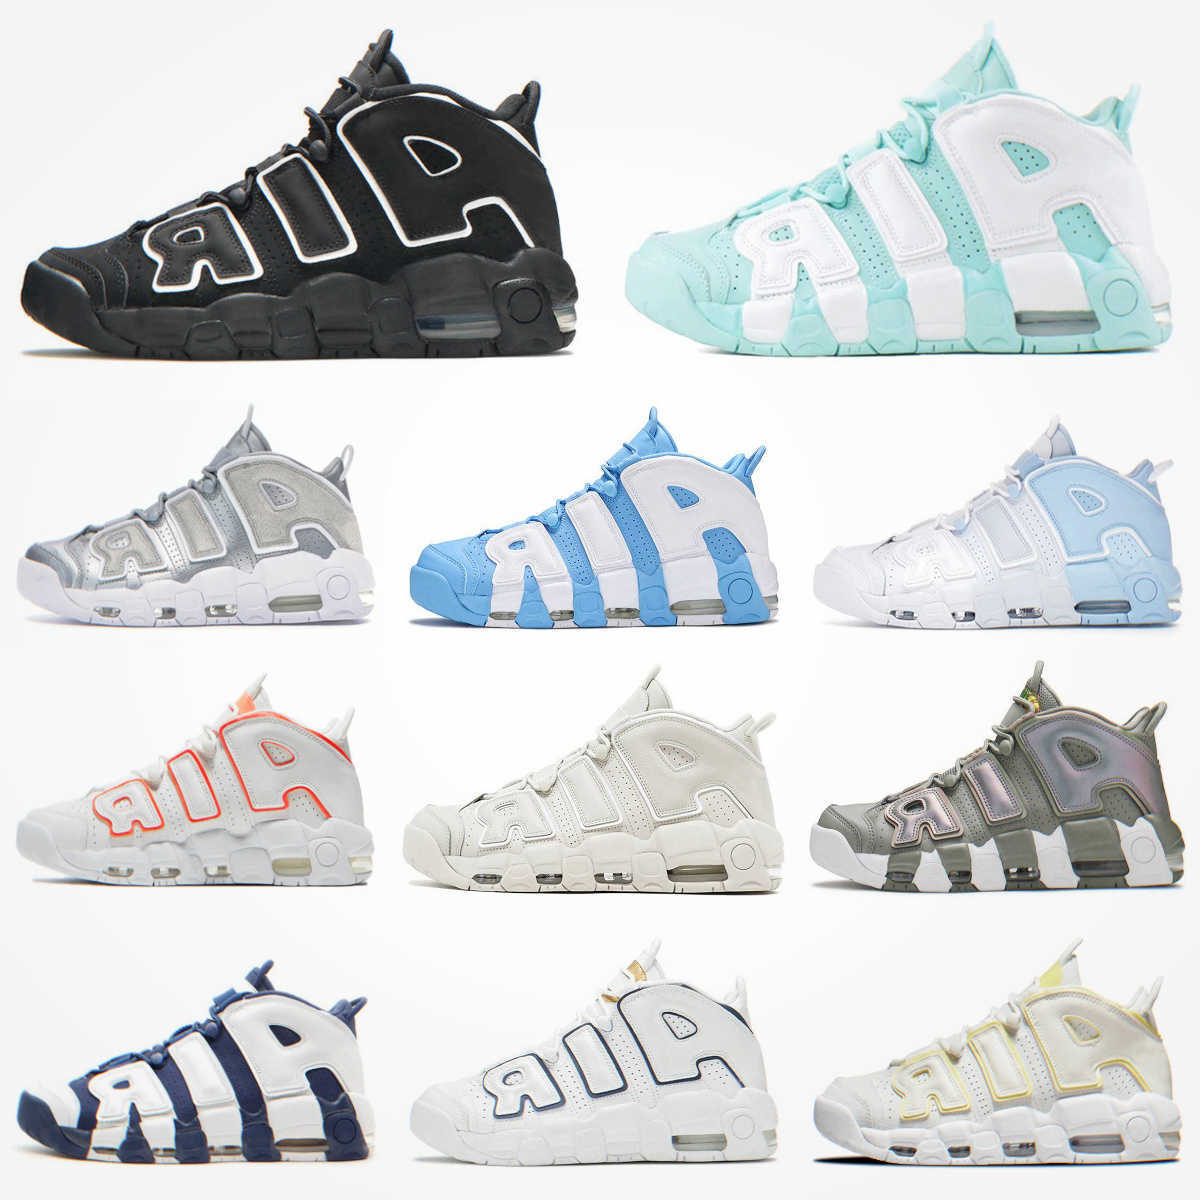 

Trainers More Uptempos 96 Basketball Shoes Black Royal Action Grape Air Light Aqua Valerian Outdoor Battle Blue Volt White Tatal Orange Hoops Barley Green Sneakers, Please contact us